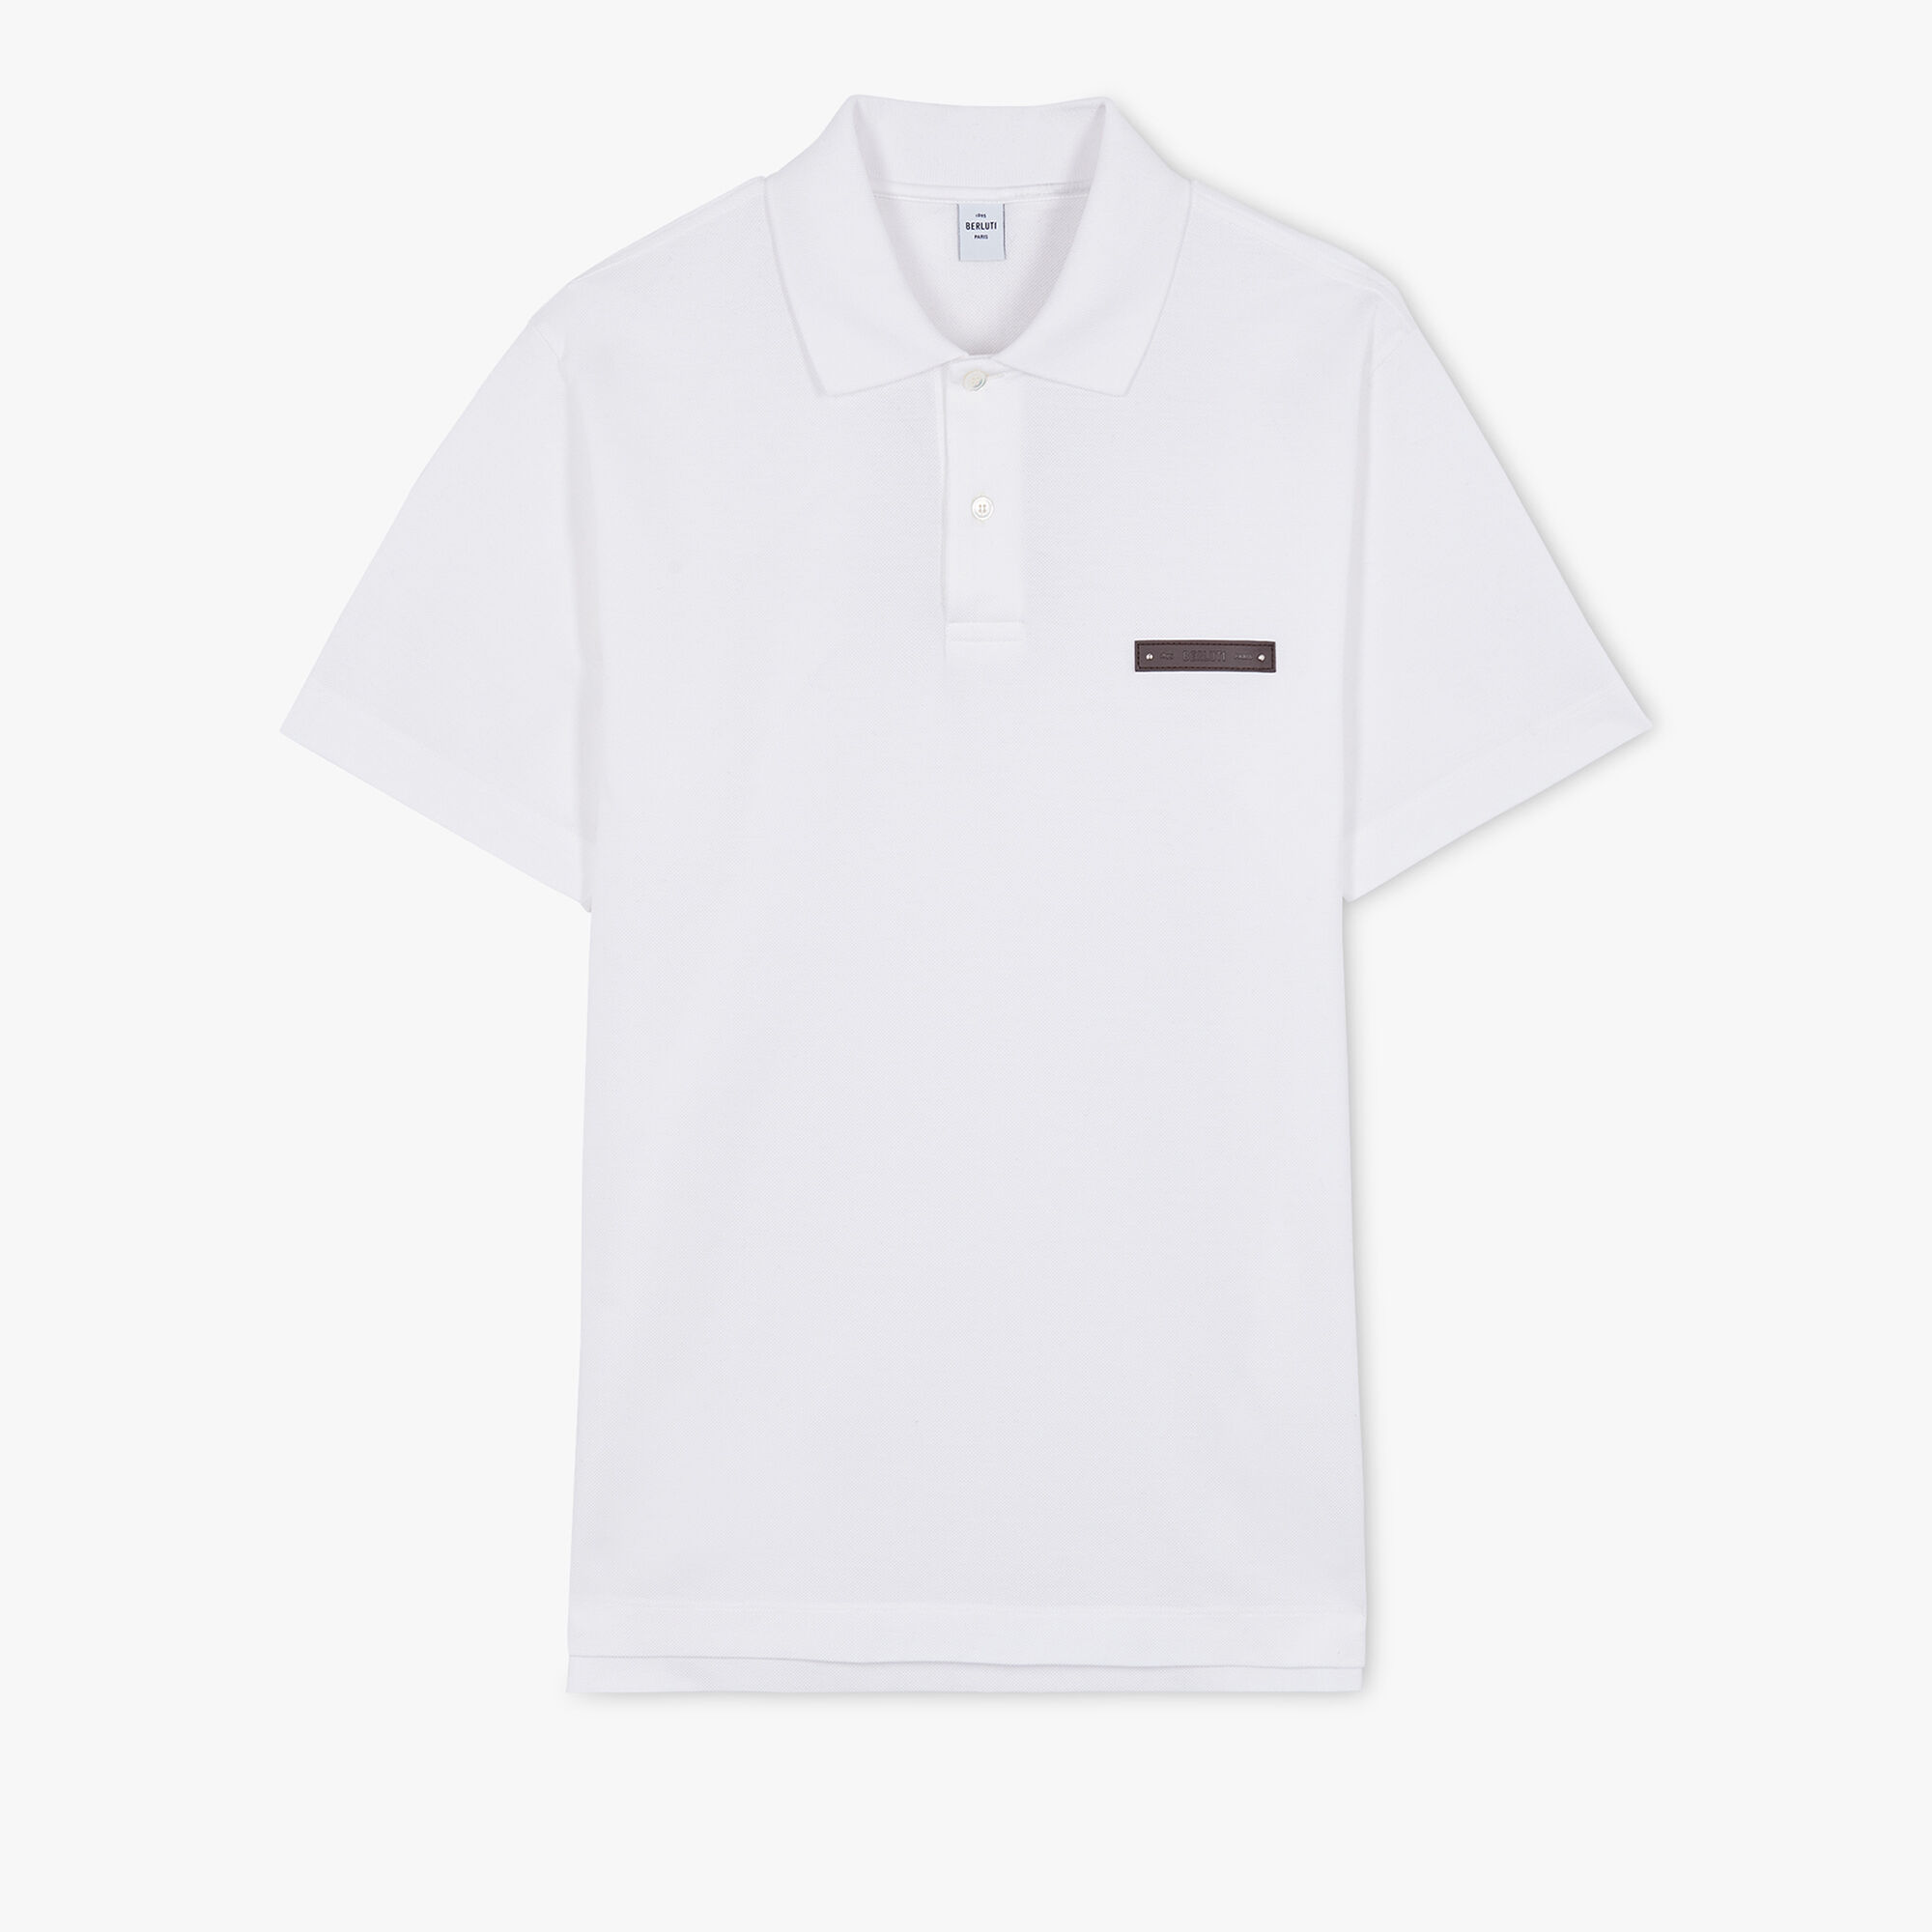 Polo and Tshirt collections by Berluti - US